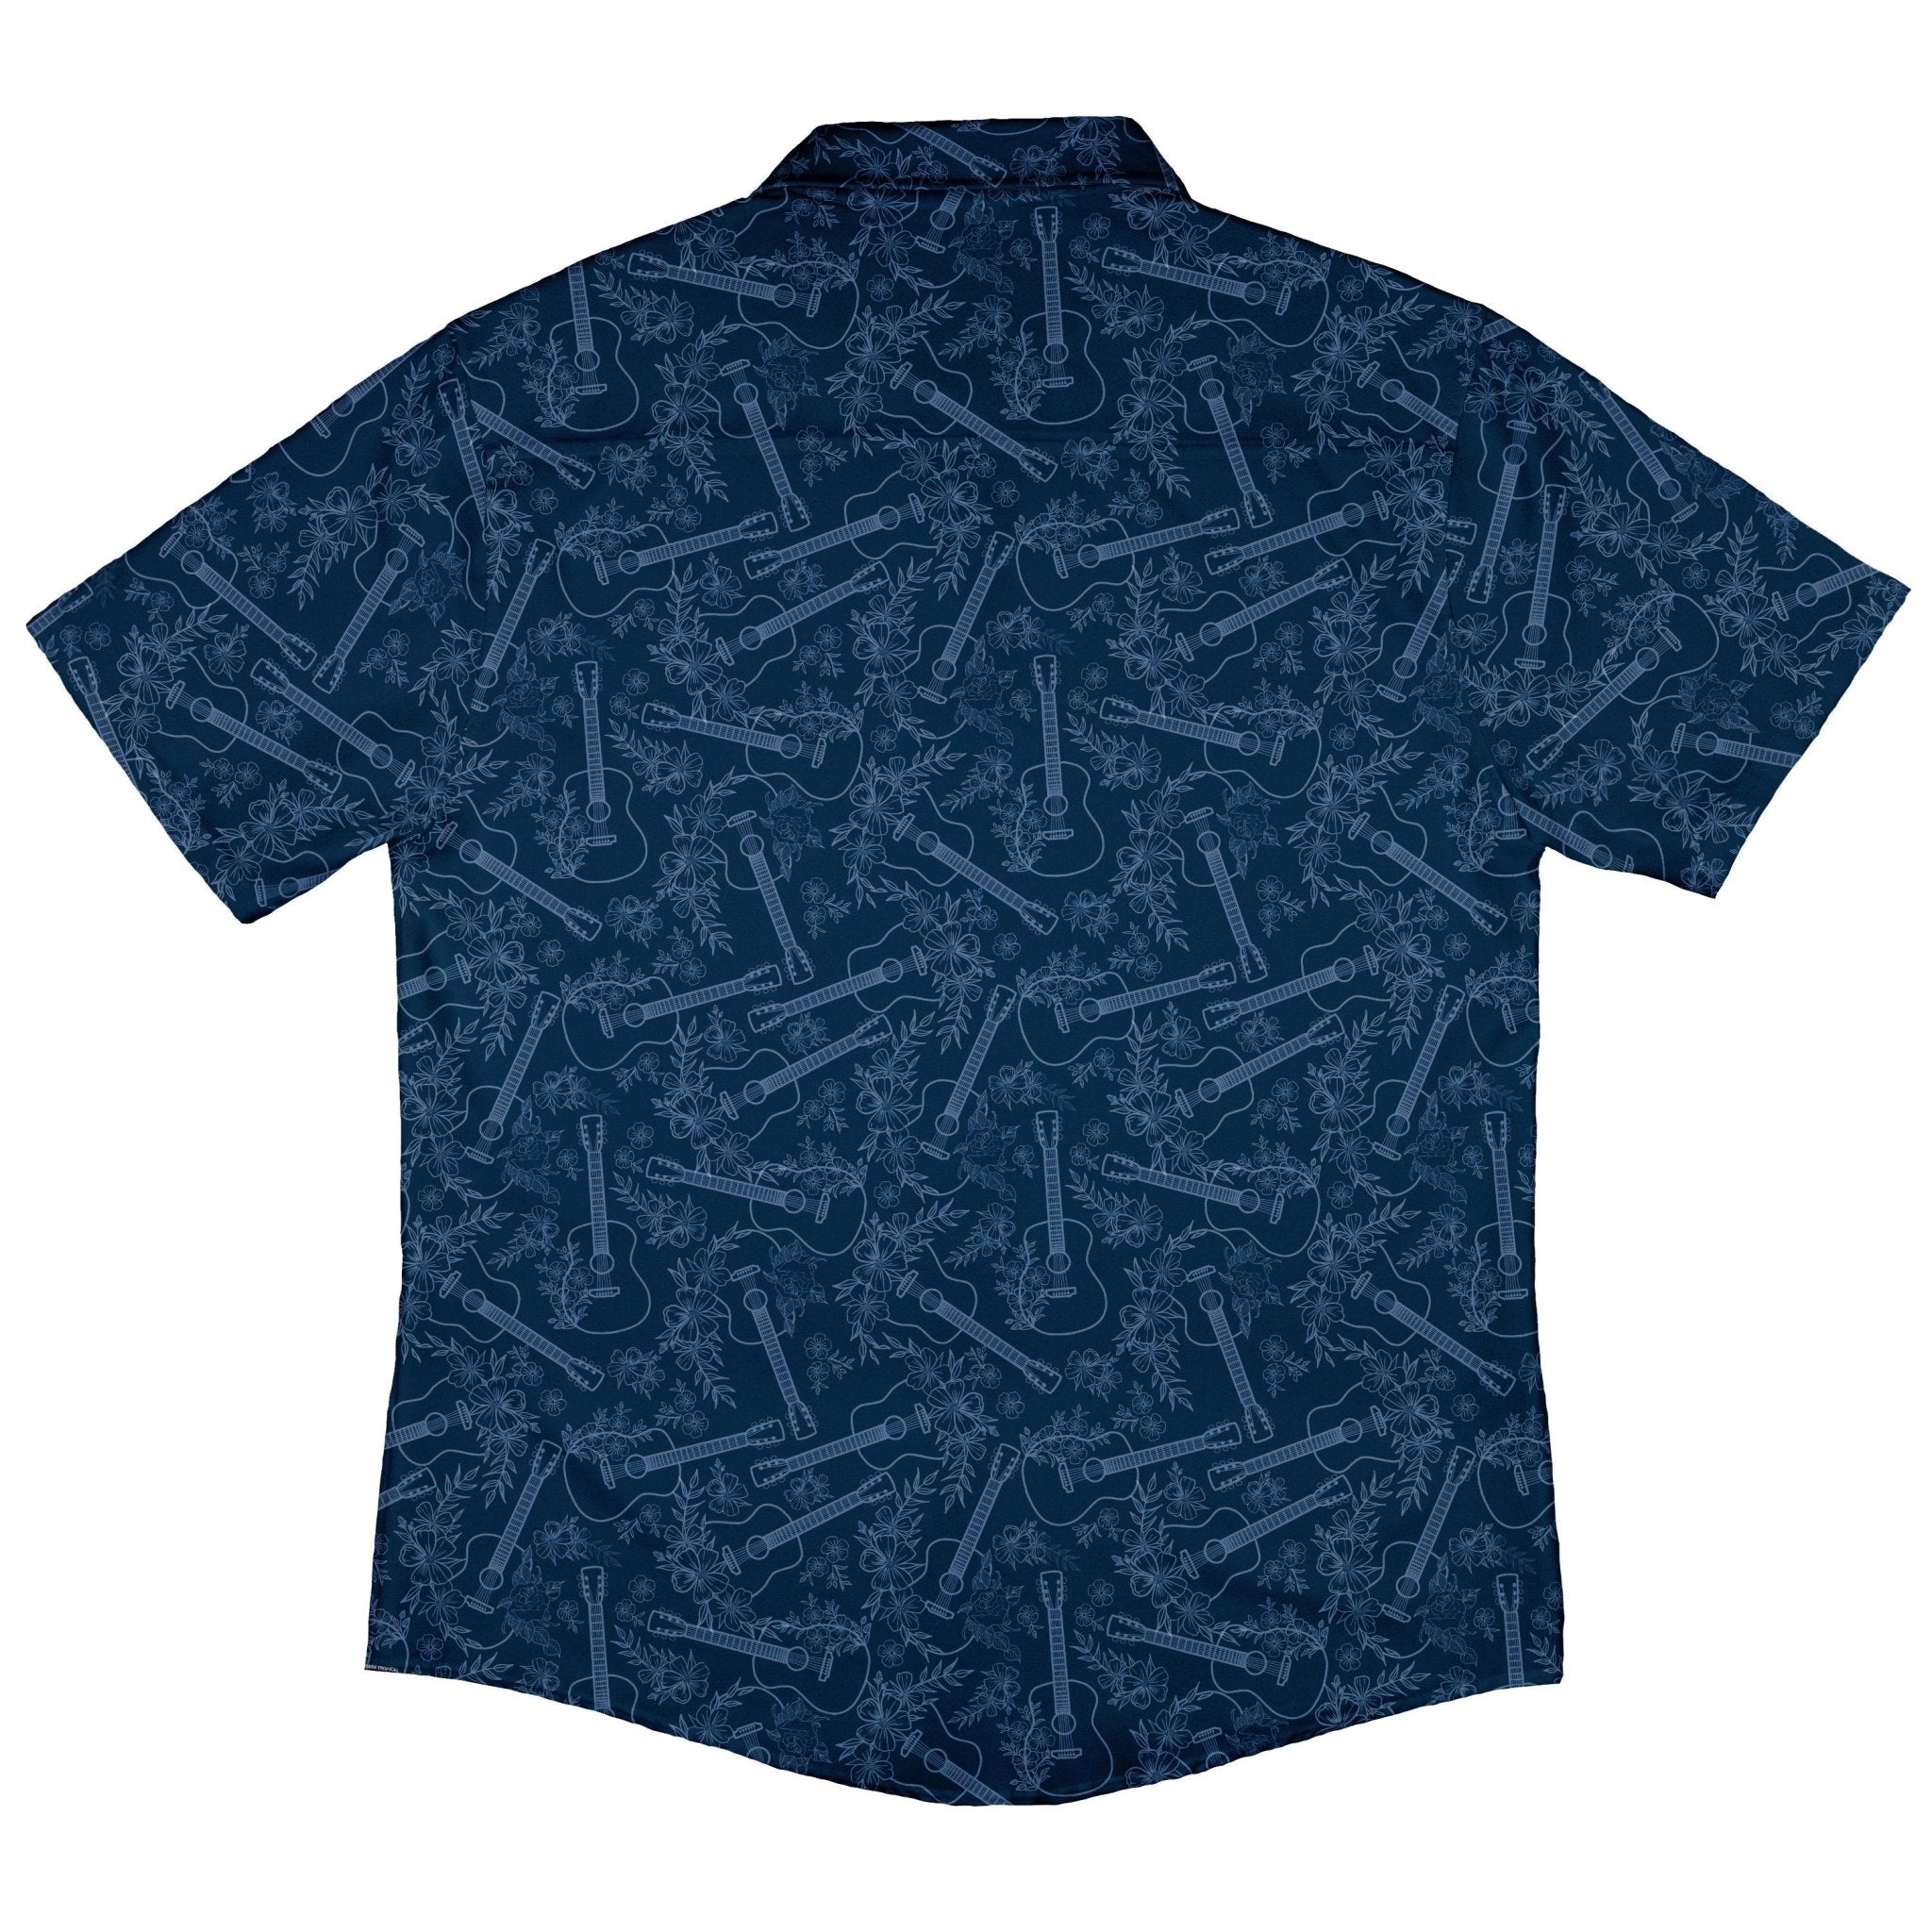 Guitar Blossoms Blue Button Up Shirt - adult sizing - Design by Dunking Toast - music print